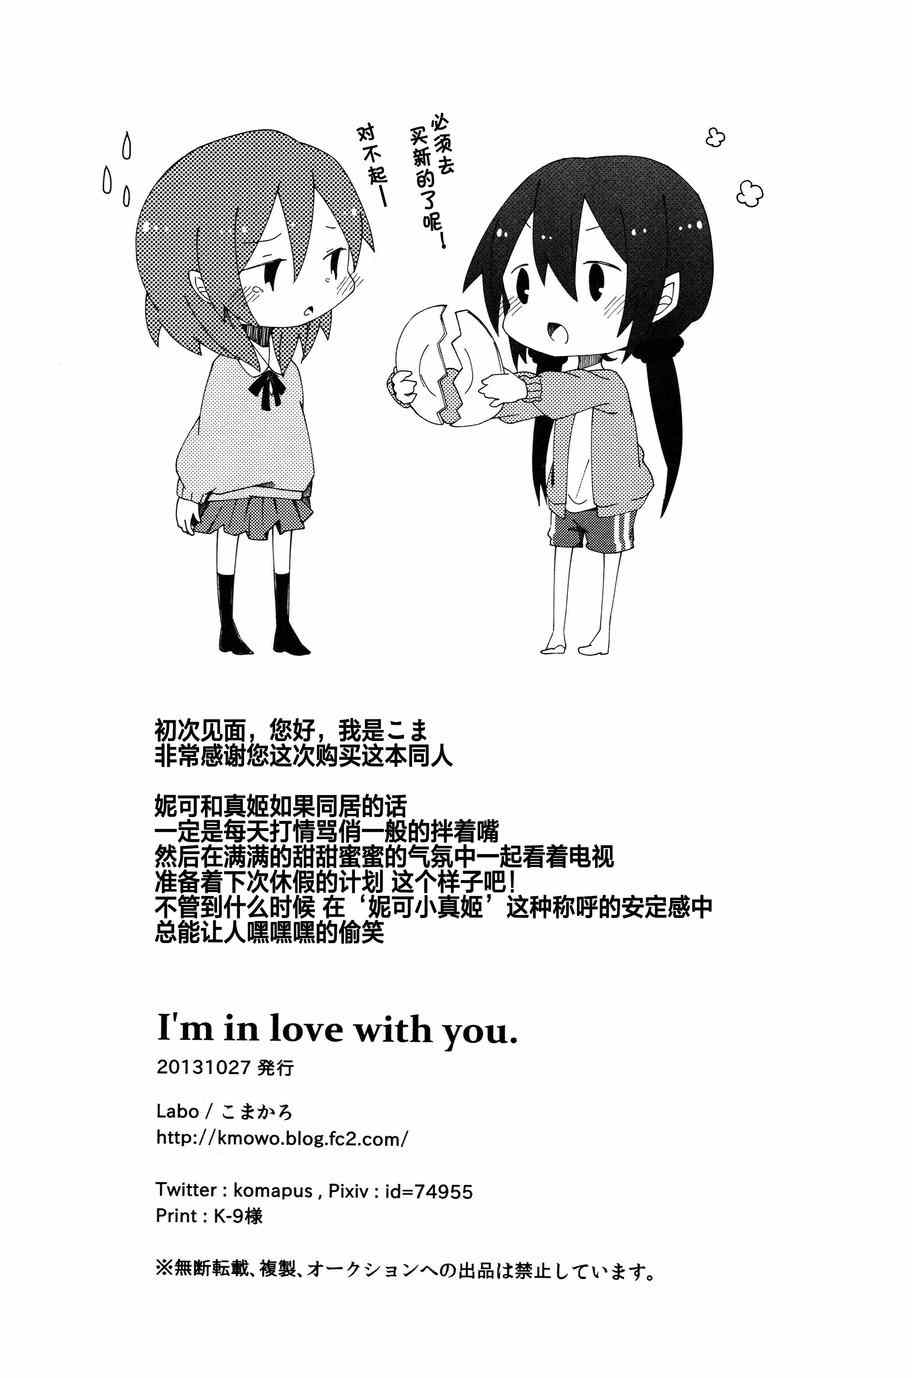 《LoveLive》漫画 I m in love with you